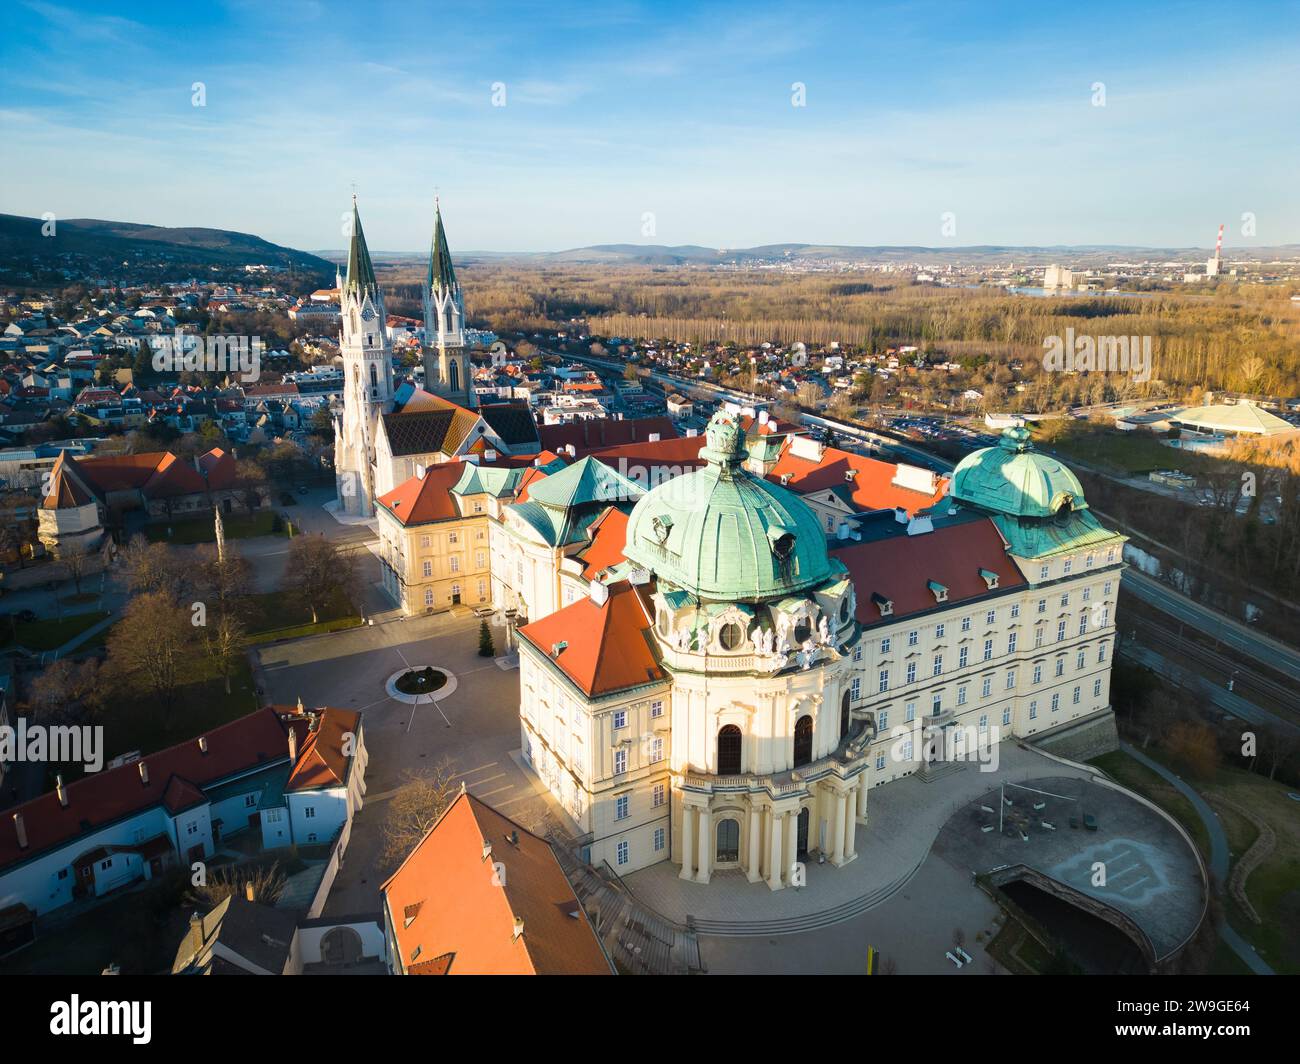 Aerial view to the Klosterneuburg Monastery in the Lower Austria region. Famous touristic destination and landmark. Stock Photo